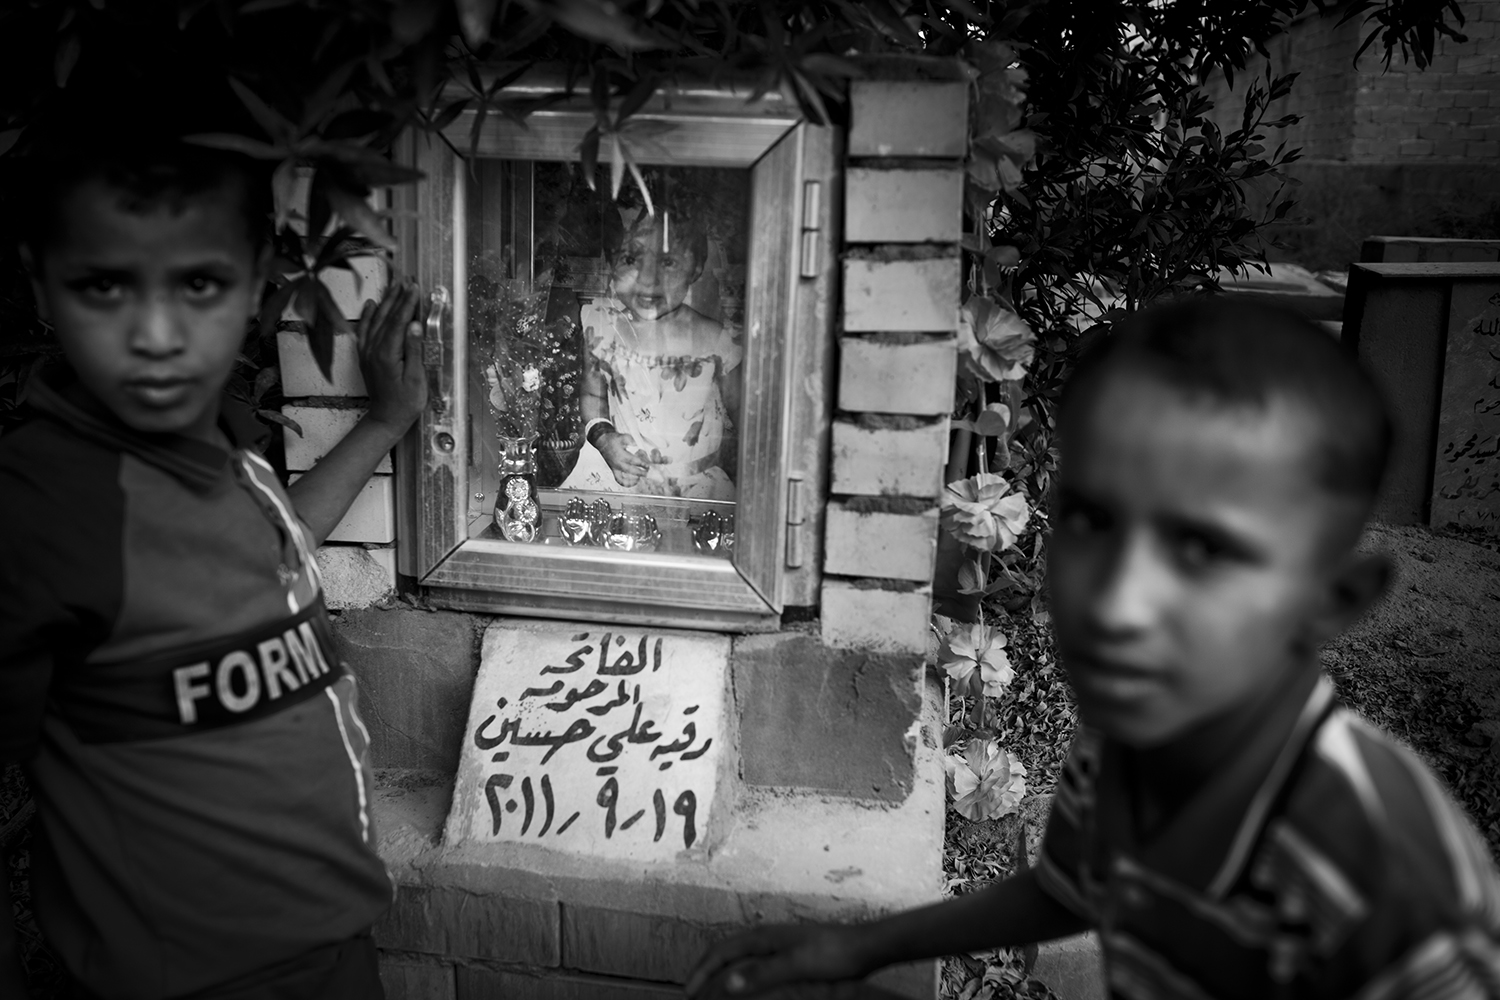 Apr. 21, 2012. Basra. Two boys by the grave of a young girl in the children's cemetery.